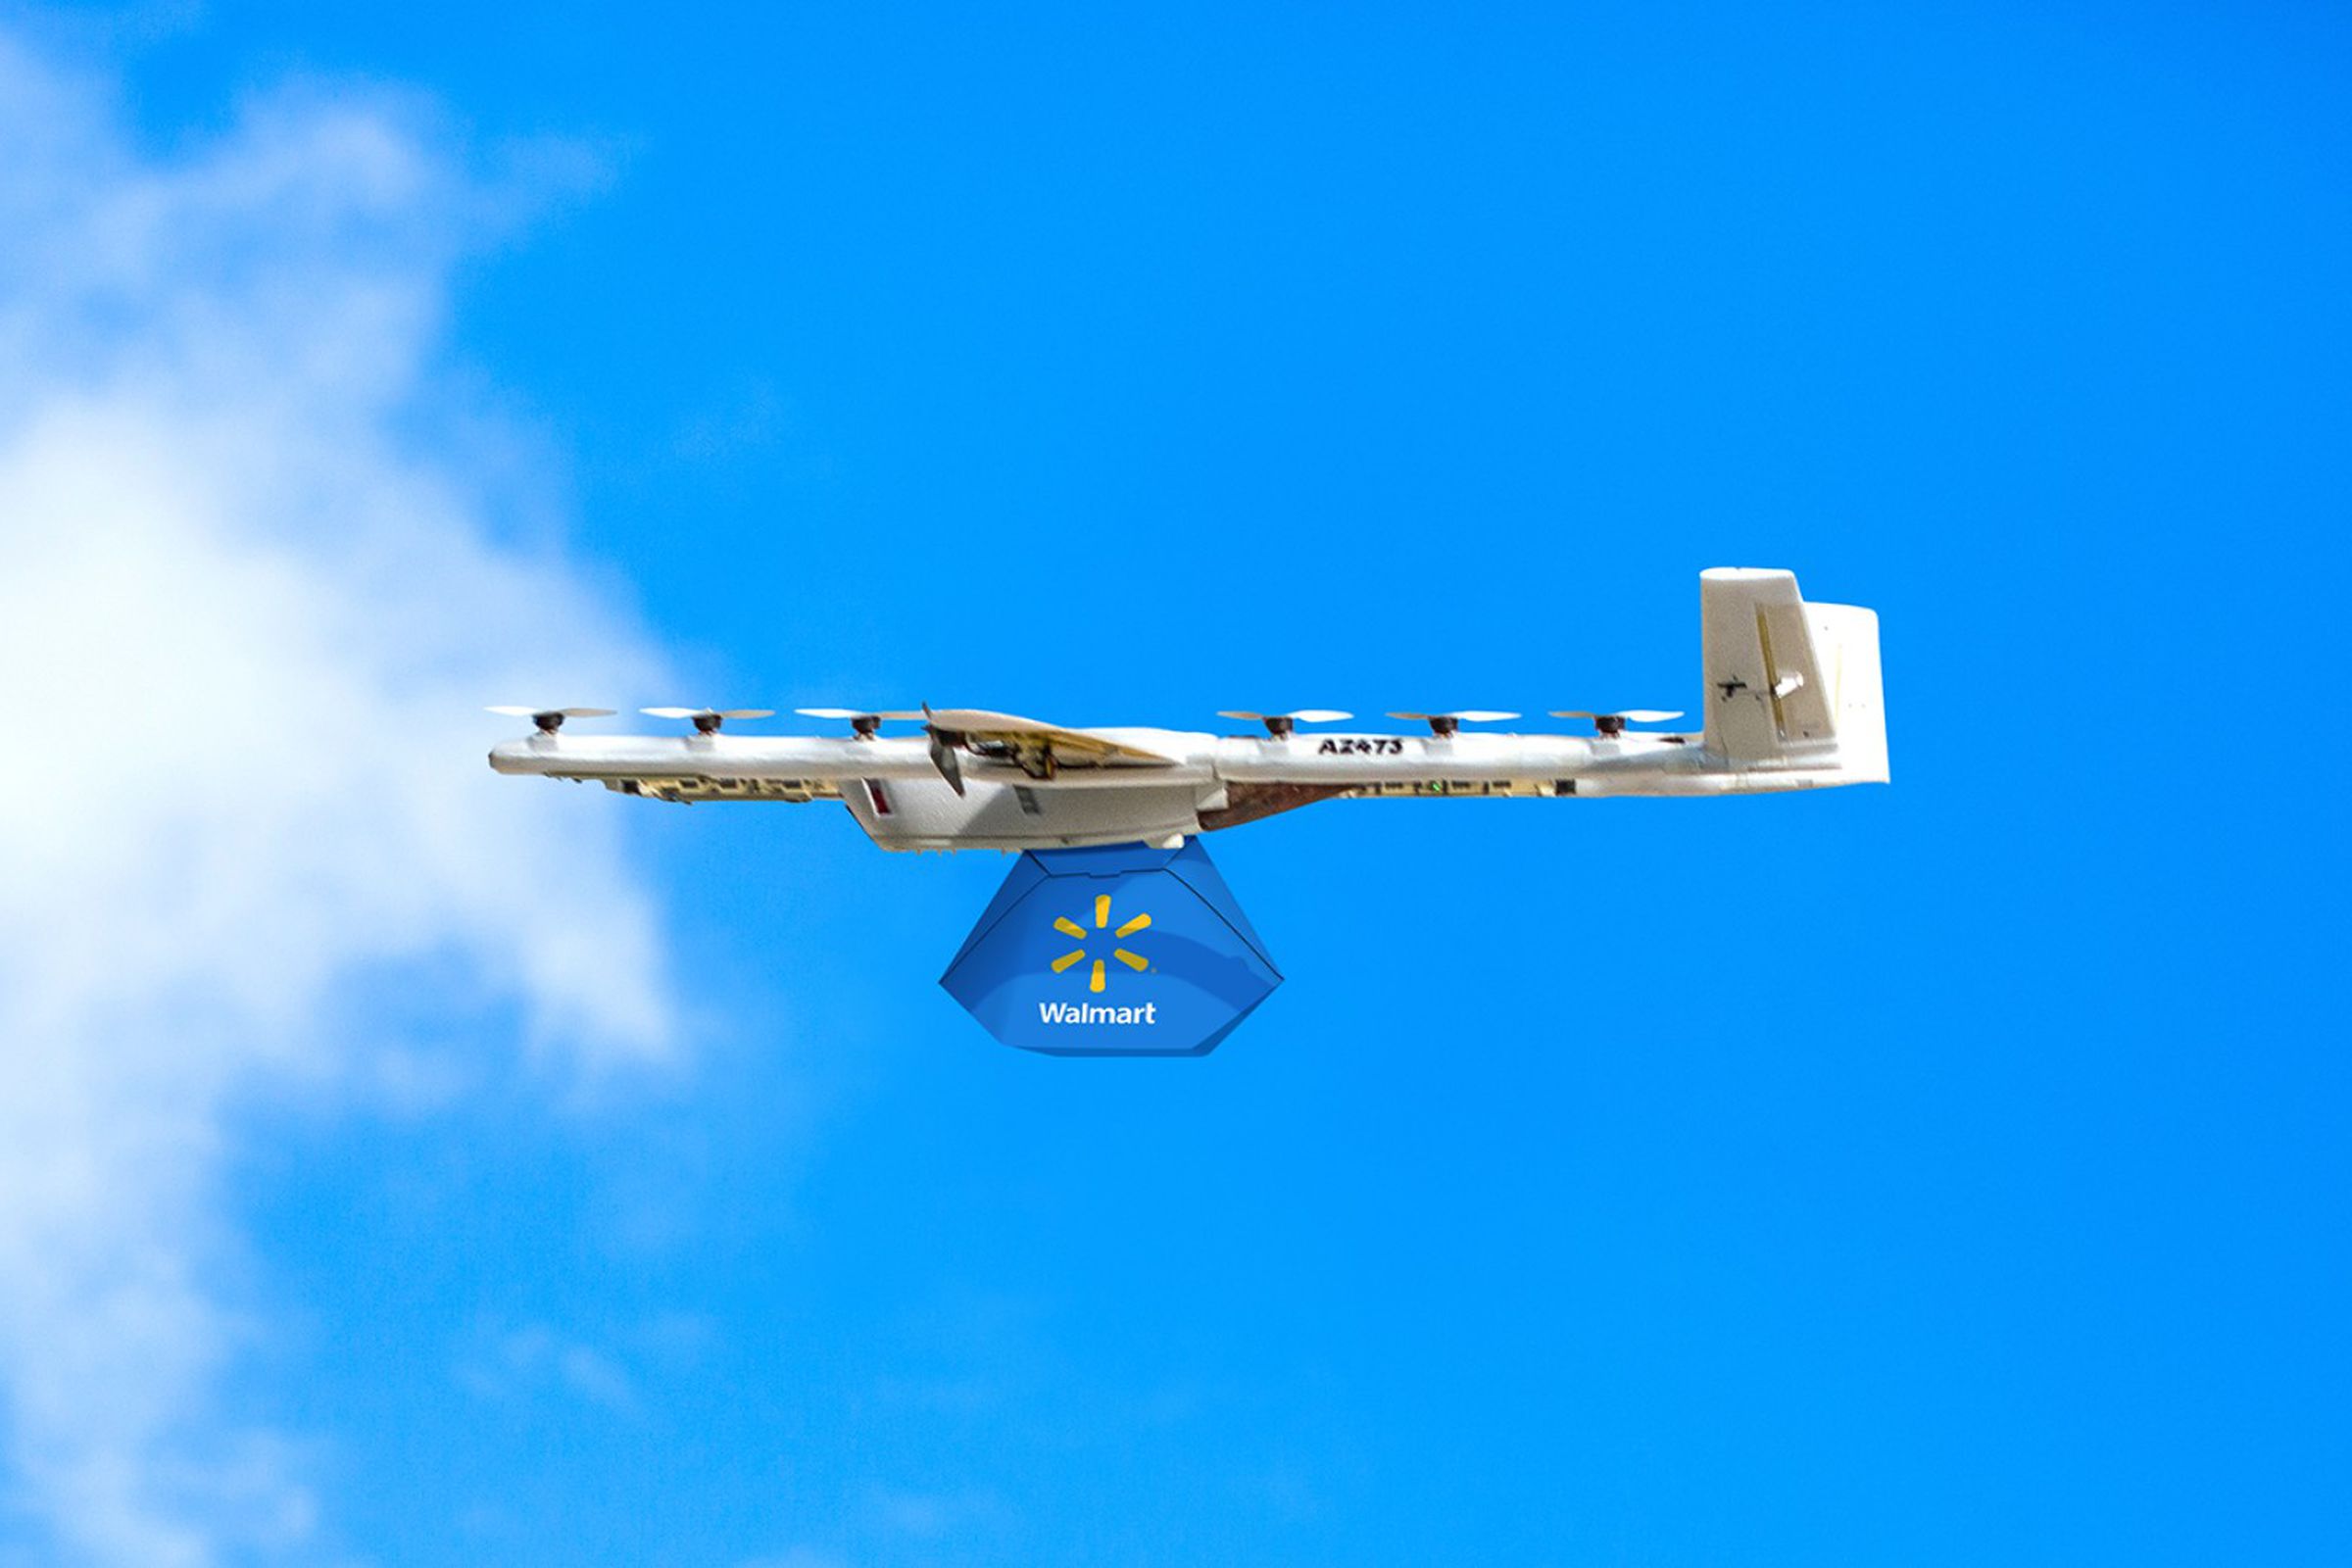 A photo showing a Wing drone carrying a Walmart delivery